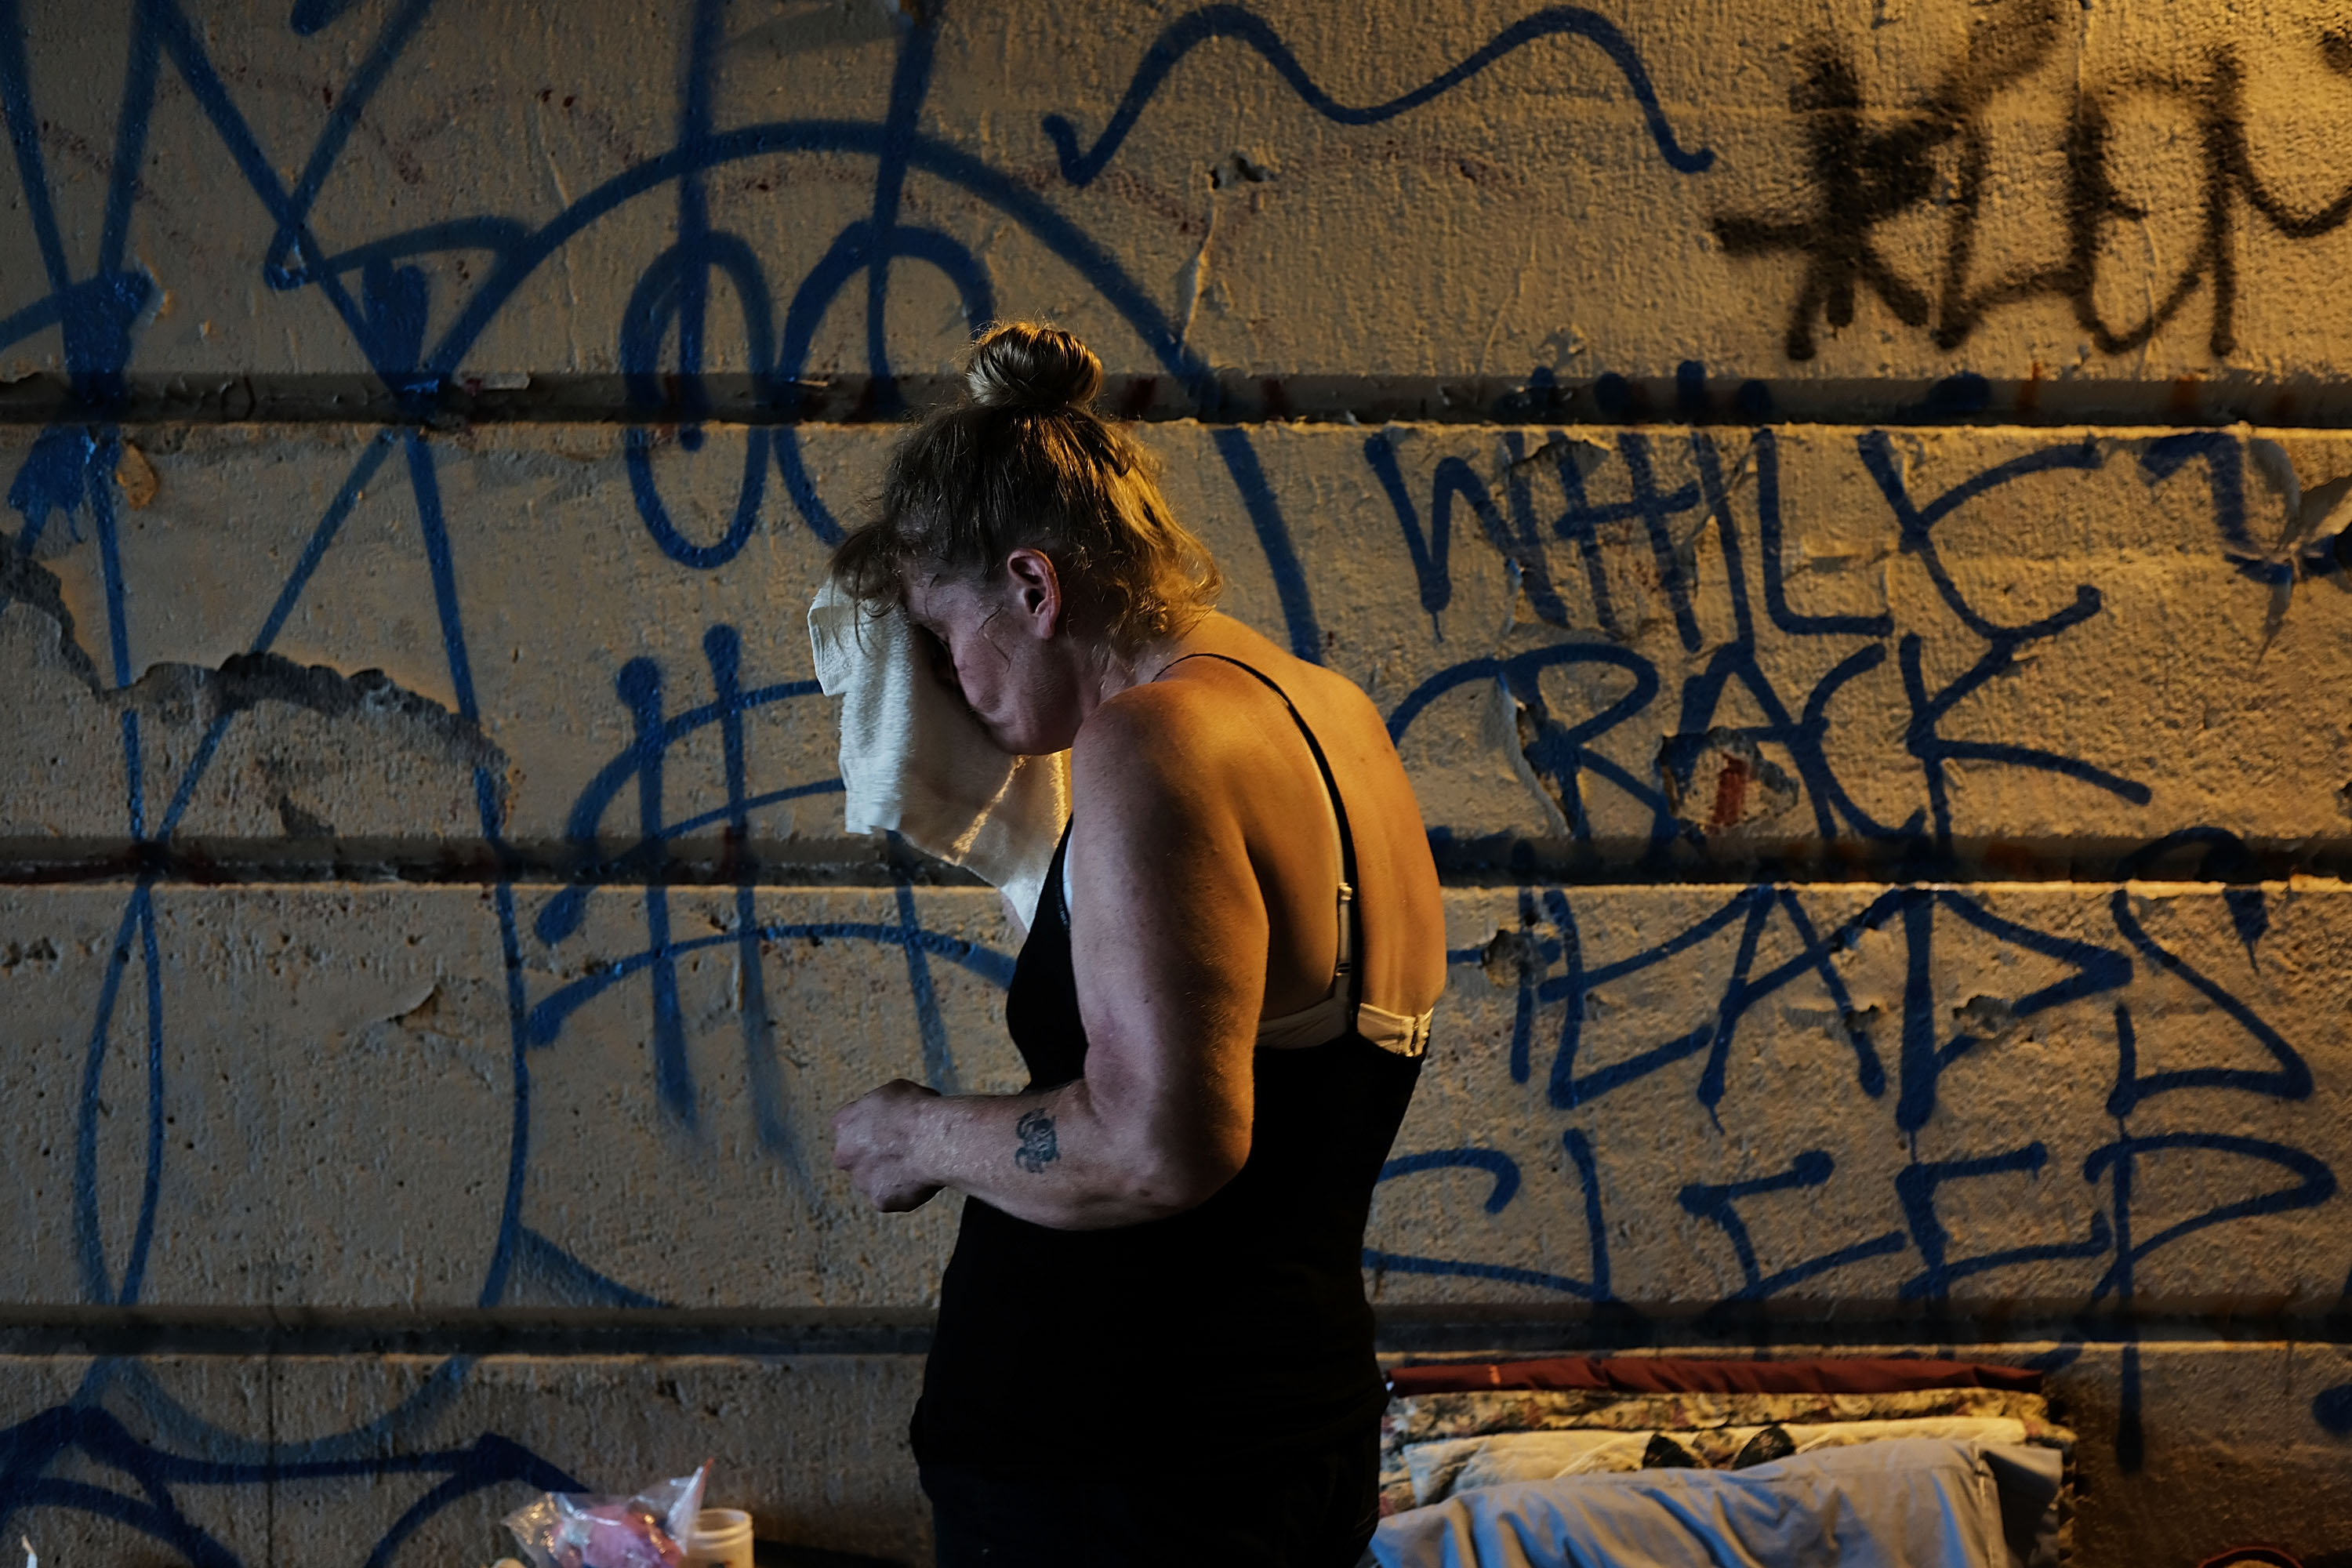 A woman stands in front of a graffitied wall holding a towel to her face.